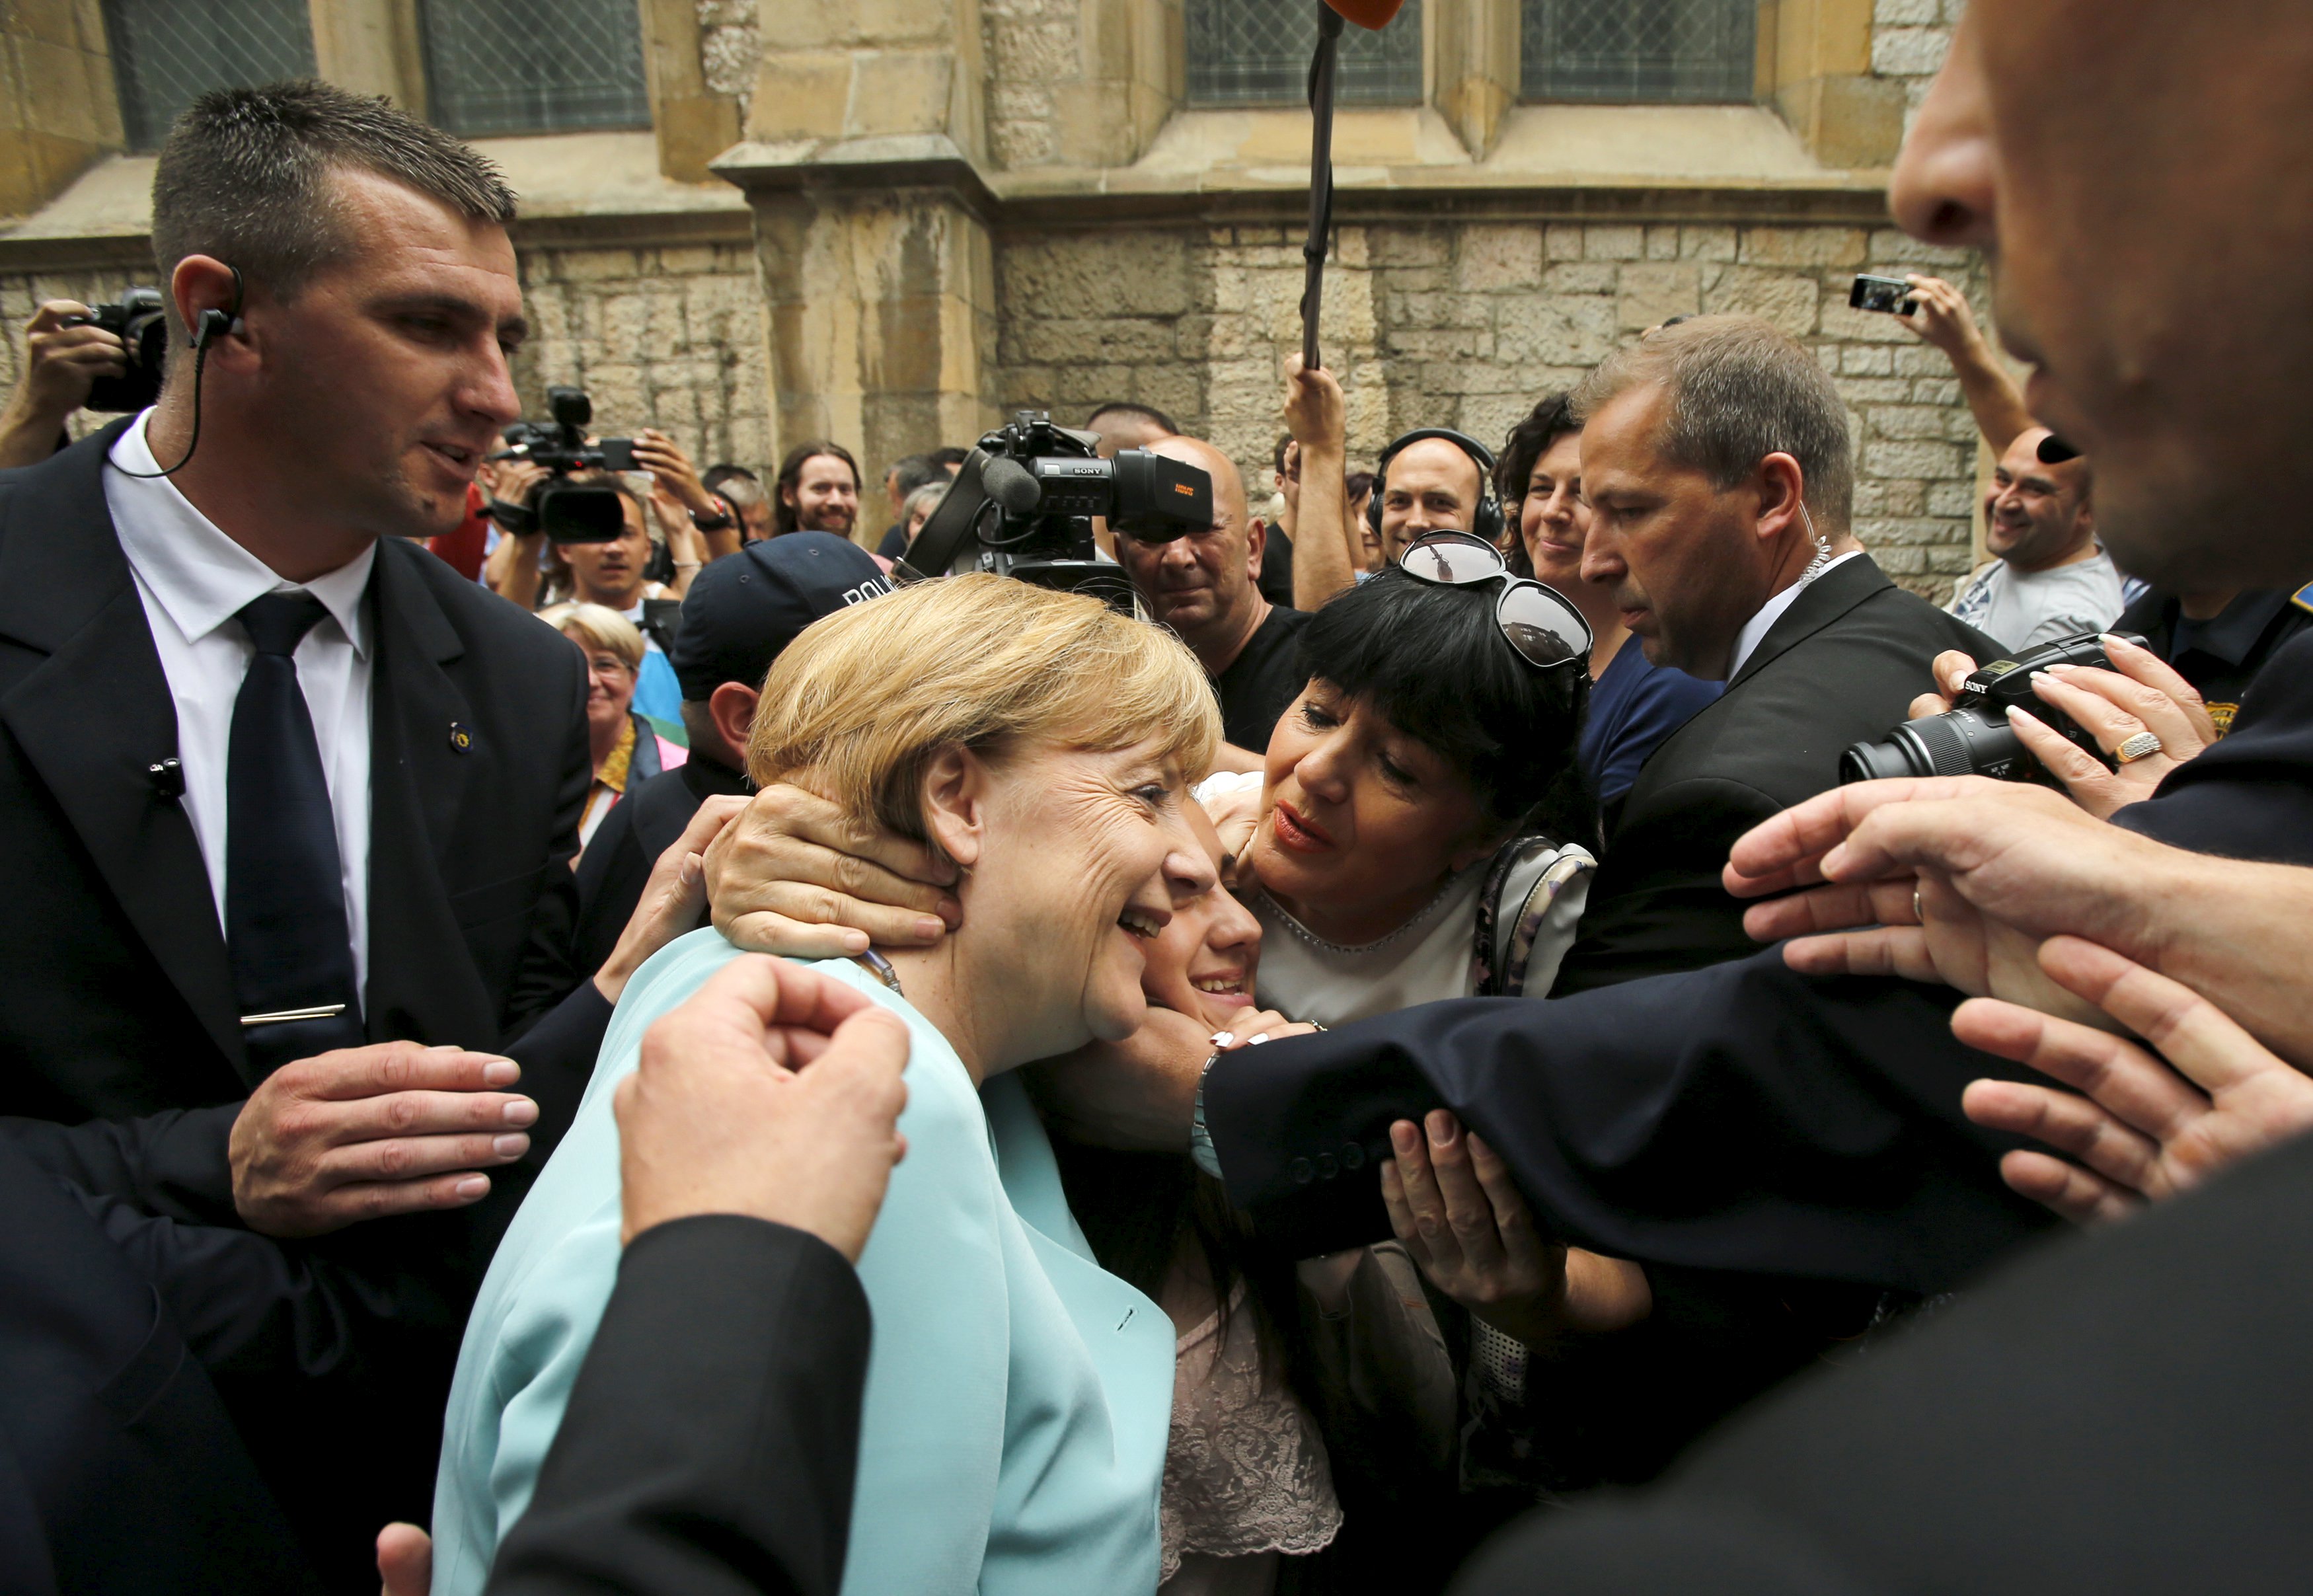 A woman tries to kiss German Chancellor Angela Merkel after she visited the Srebrenica exhibition in downtown of Sarajevo, Bosnia and Herzegovina, July 9, 2015. REUTERS/Antonio Bronic